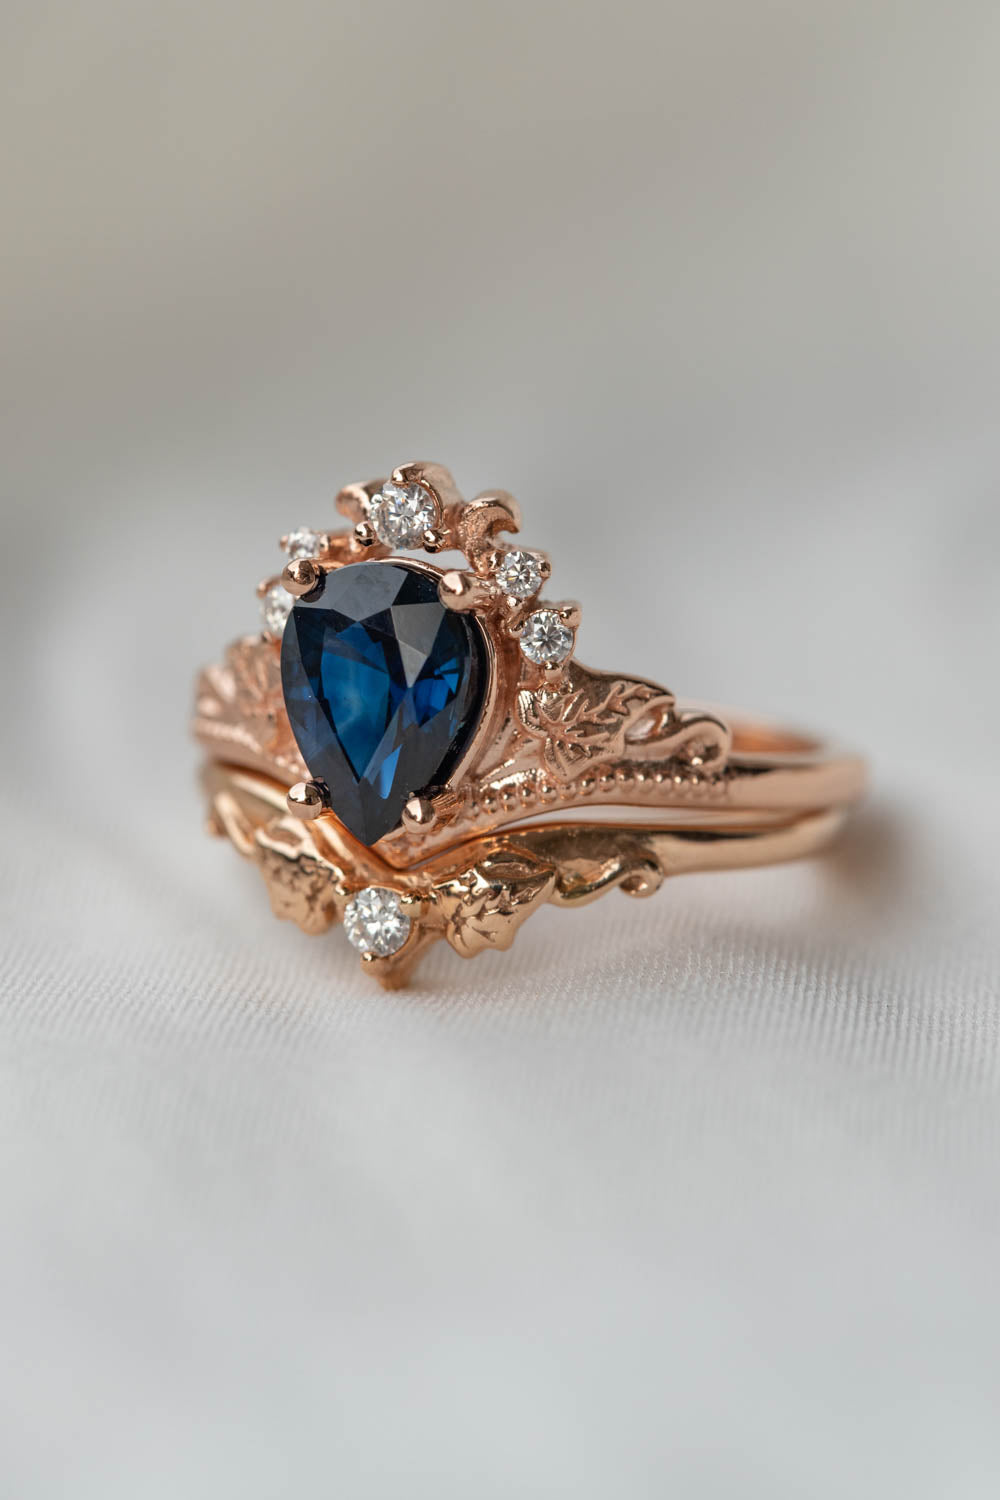 Sapphire engagement ring with diamonds, crown shape ring with real sapphire / Ariadne - Eden Garden Jewelry™